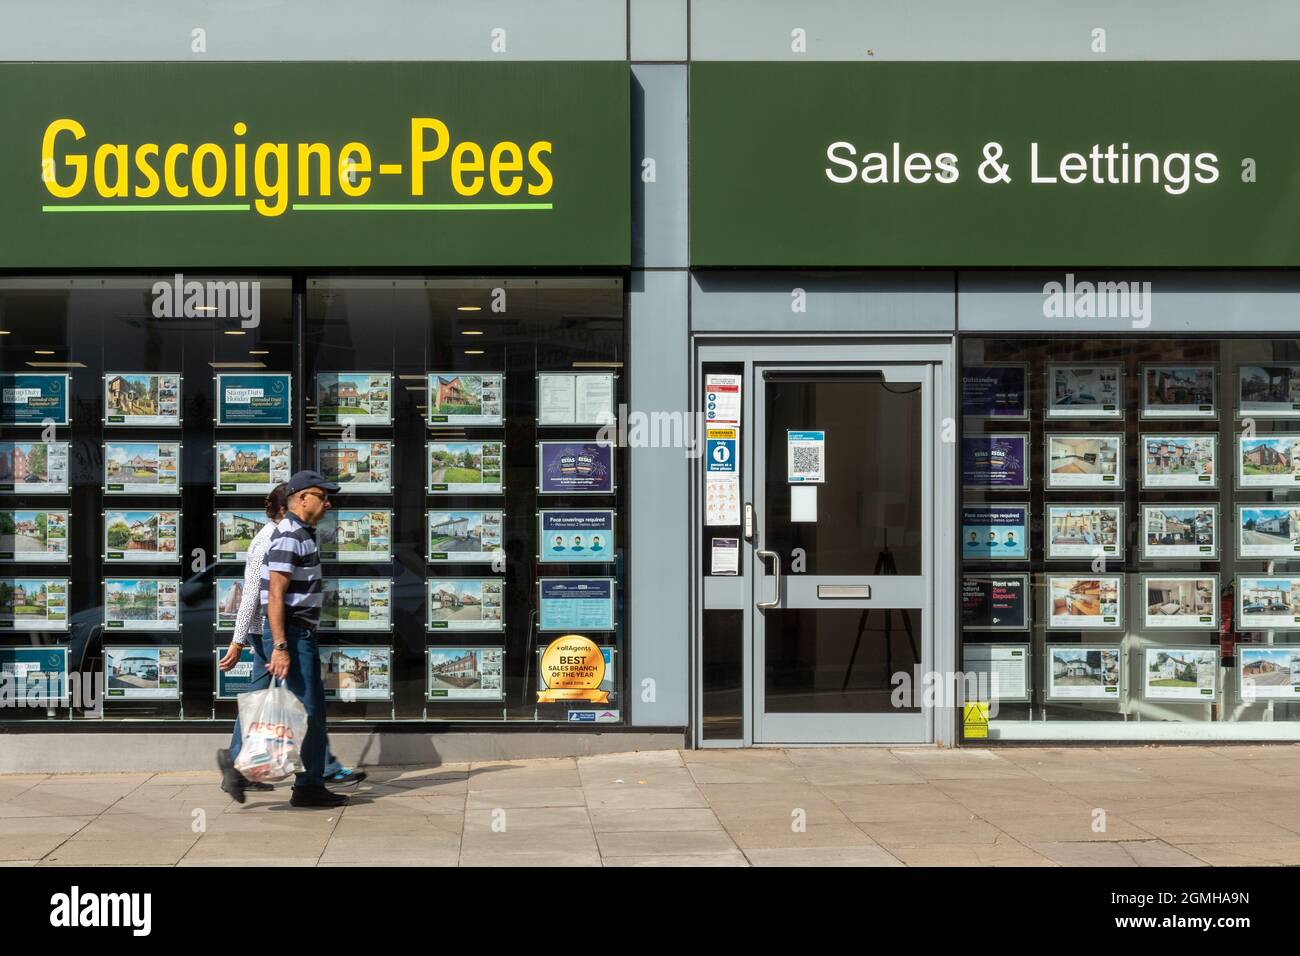 Branch of Gascoigne-Pees estate agent with people walking past, sales and lettings agency on the high street, UK Stock Photo